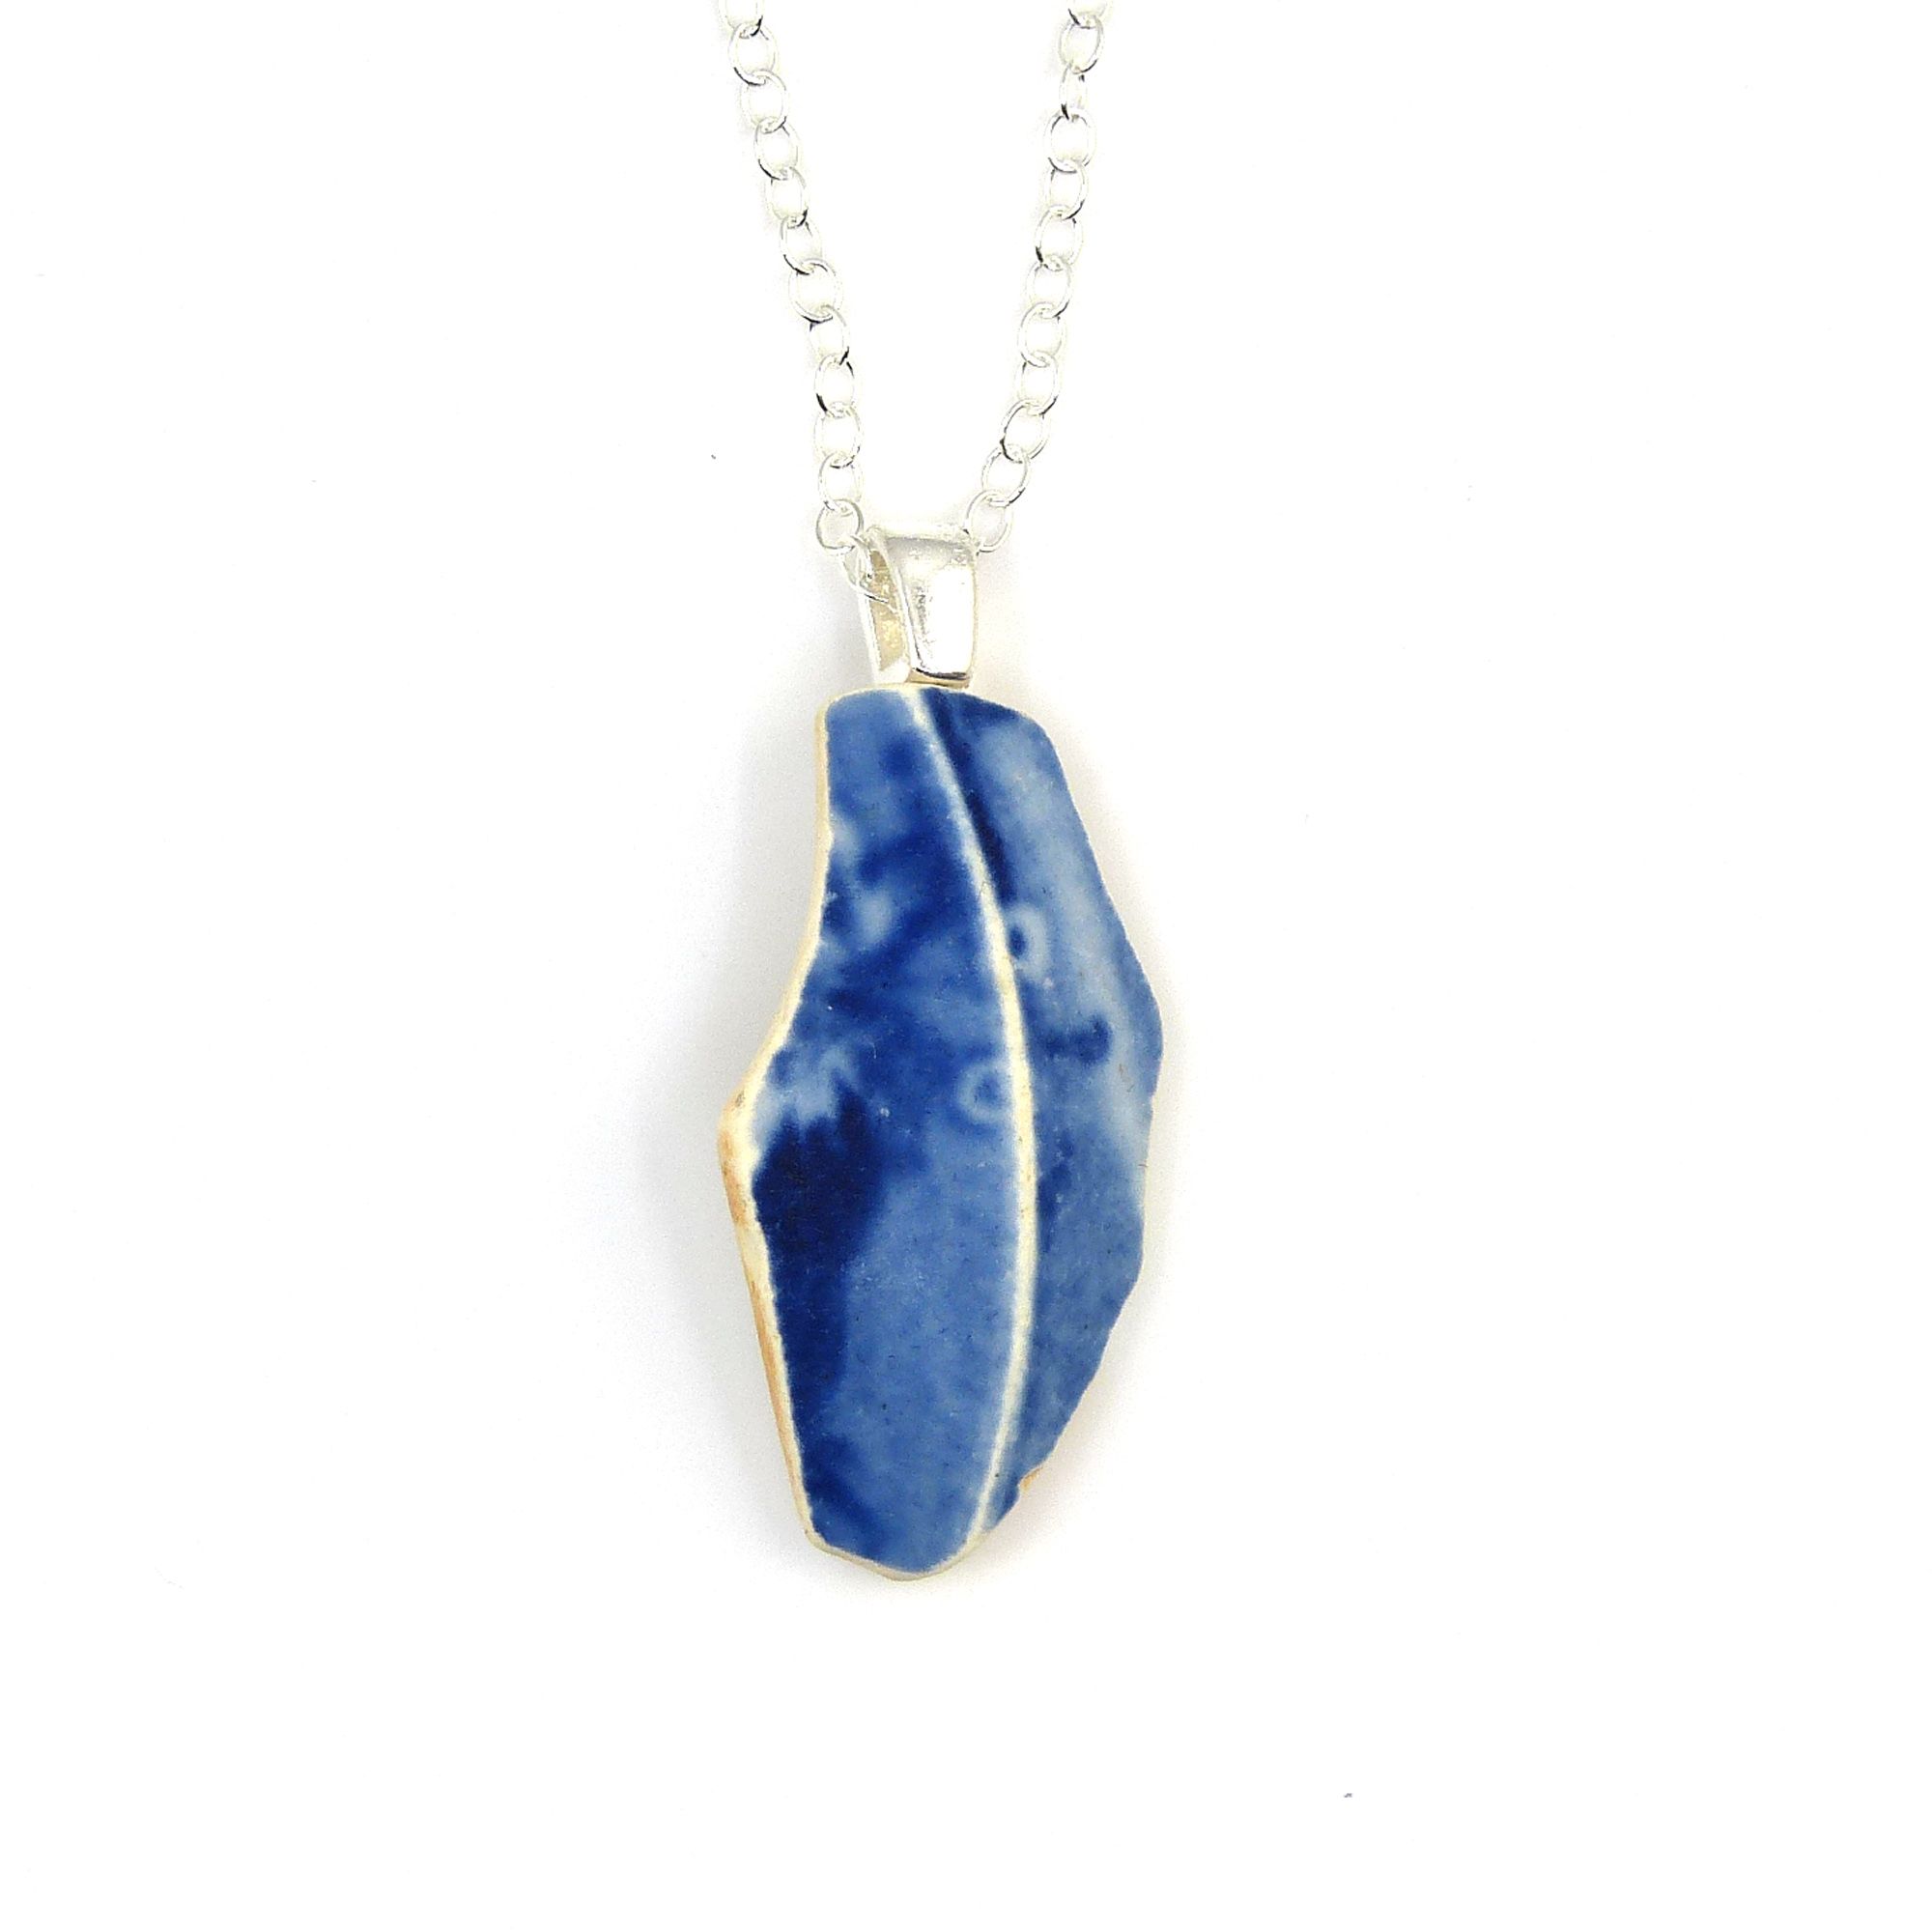 P136 blue and white pottery necklace (2)